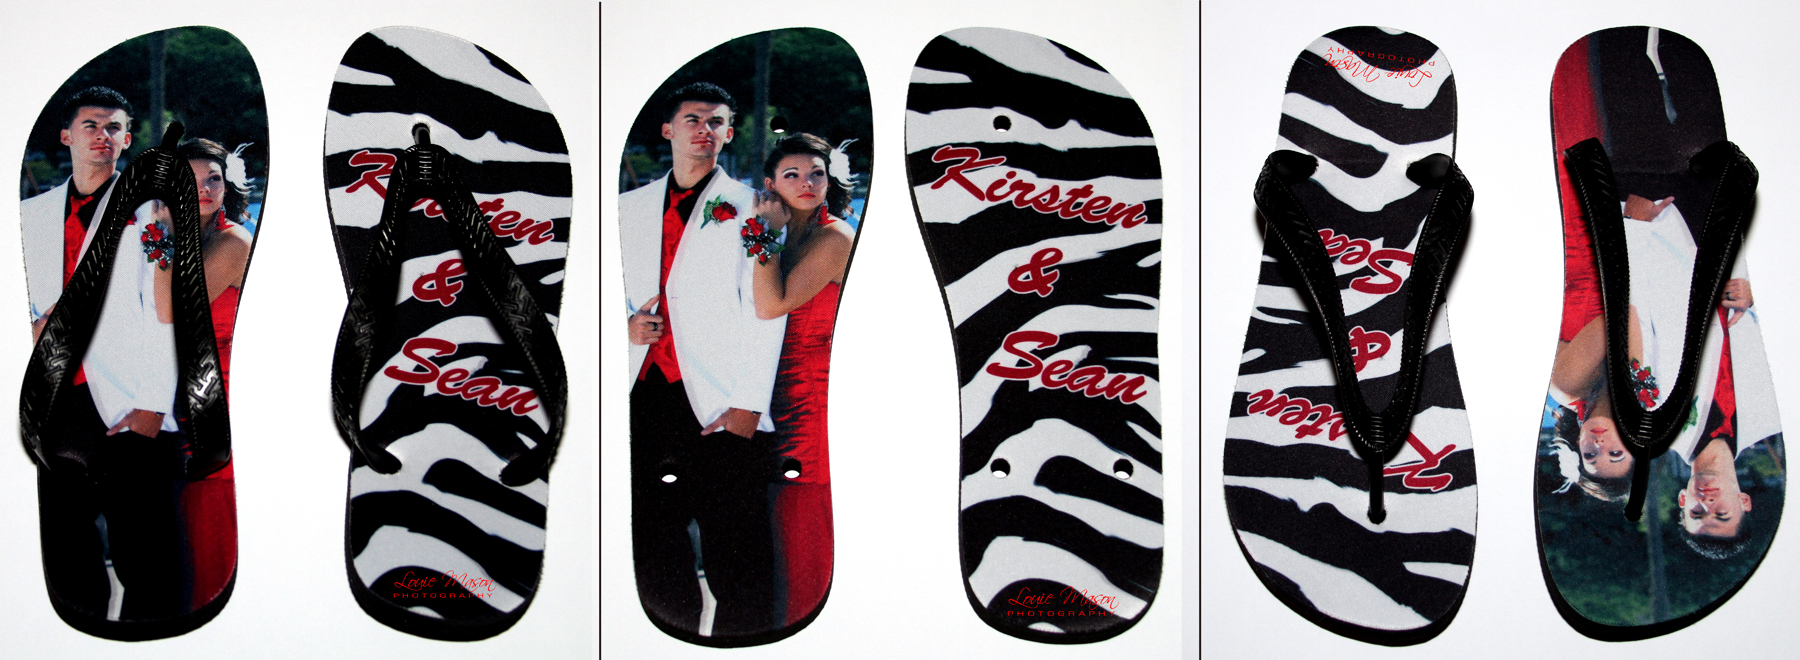 2012 Prom Flip Flops made with sublimation printing